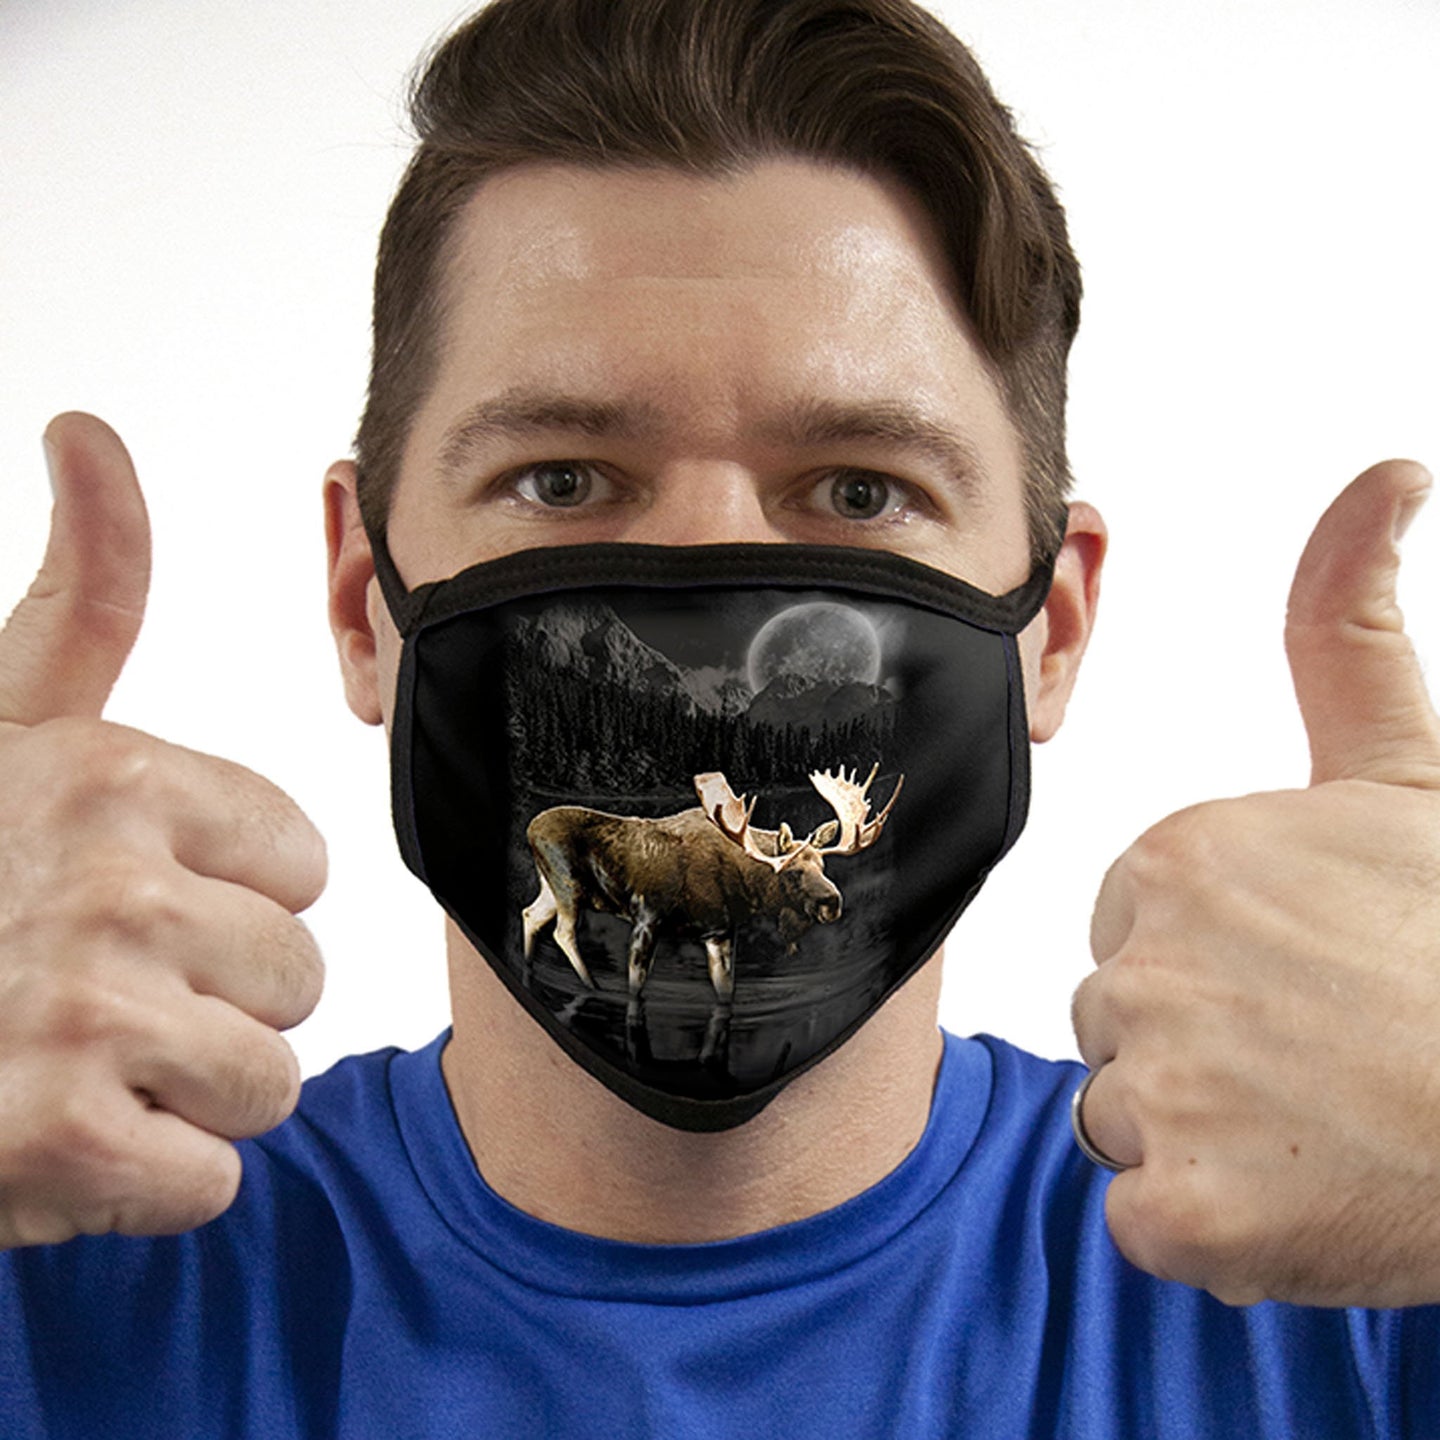 Moose FACE MASK Cover Your Face Masks